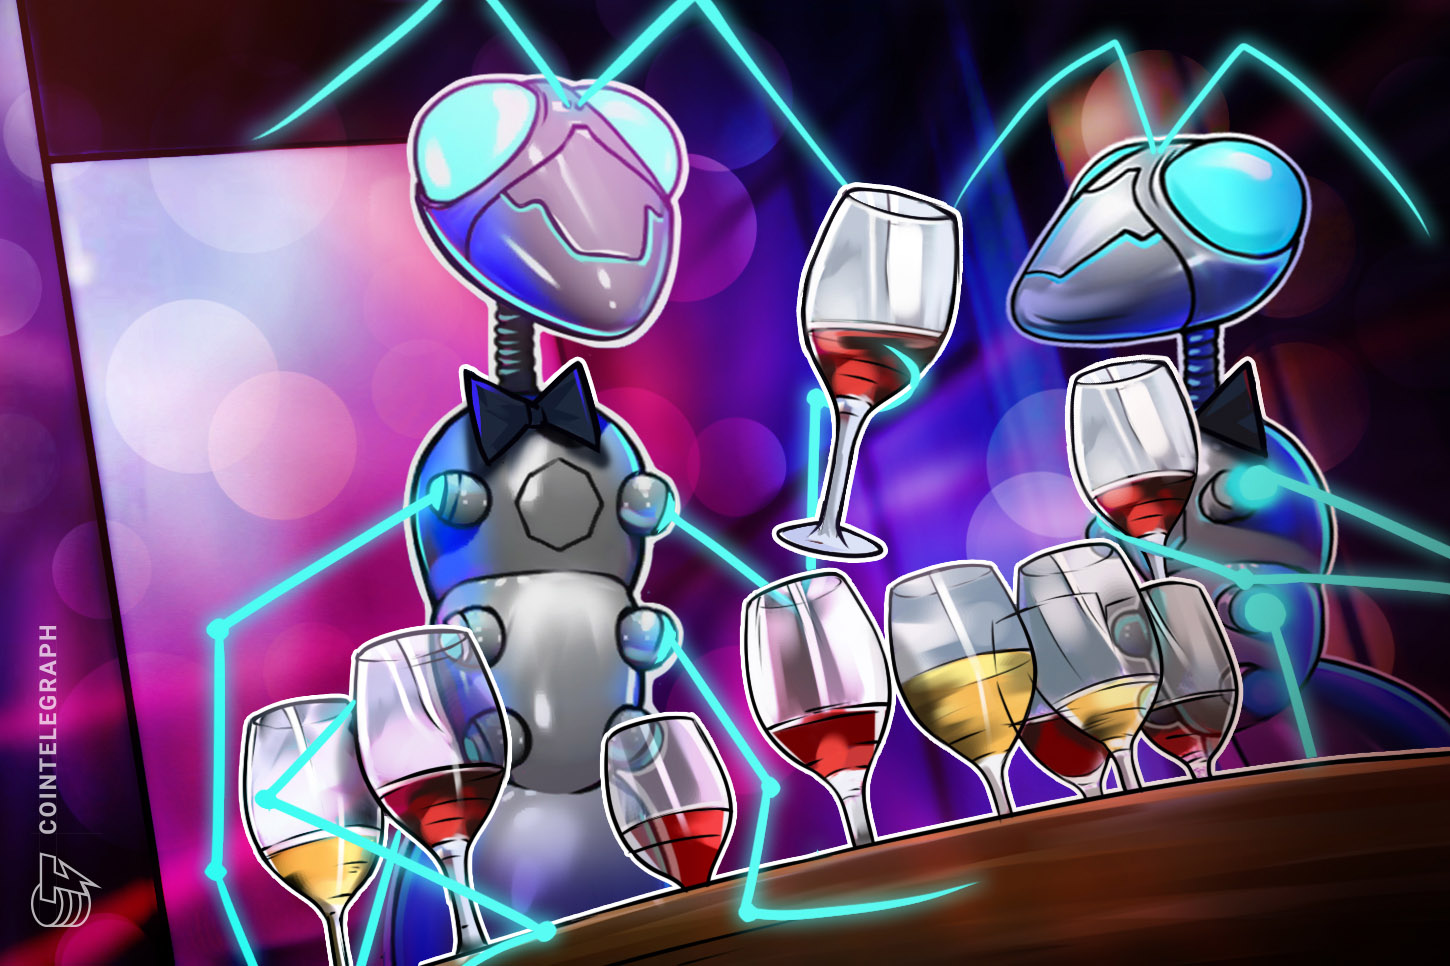 Blockchain-powered Bordeaux? IBM declares wine provide chain tracing system